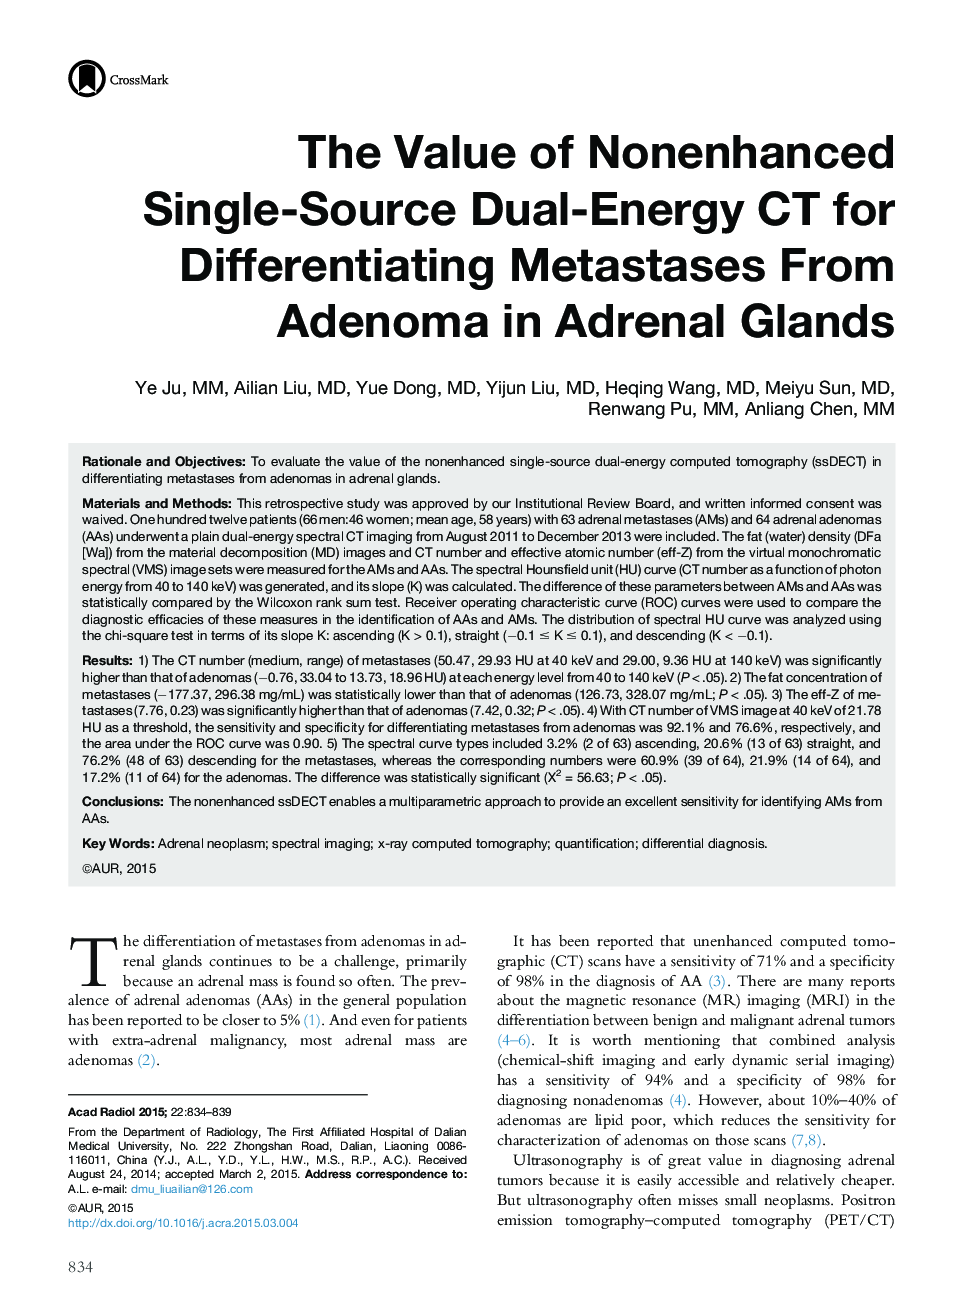 The Value of Nonenhanced Single-Source Dual-Energy CT for Differentiating Metastases From Adenoma in Adrenal Glands